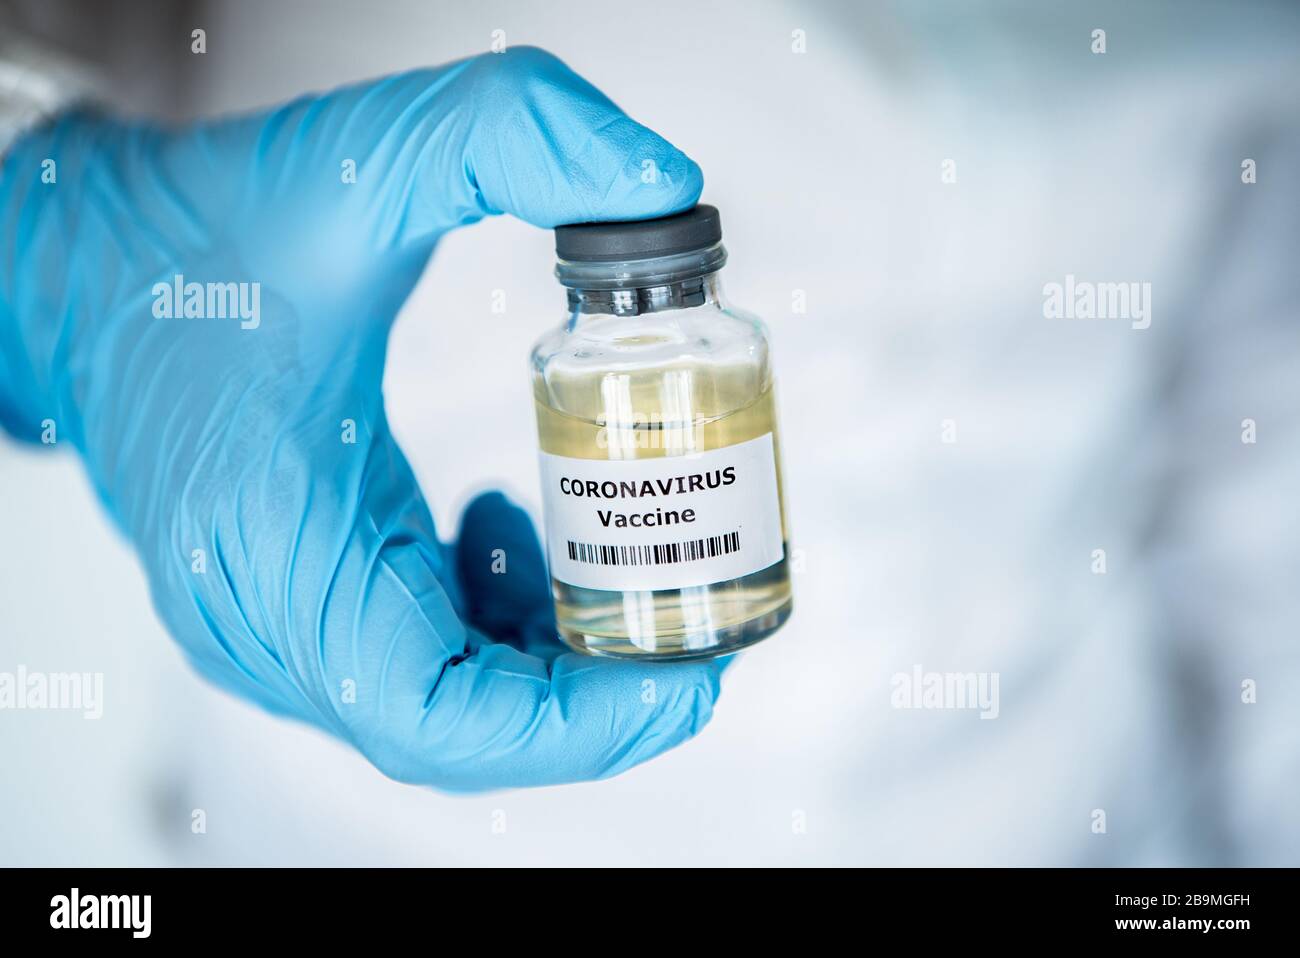 Scientific with protective suit holds a vaccine for coronavirus. Vaccination for COVID-19. 2019-nCoV found in Wuhan China. Epidemic virus outbreak con Stock Photo